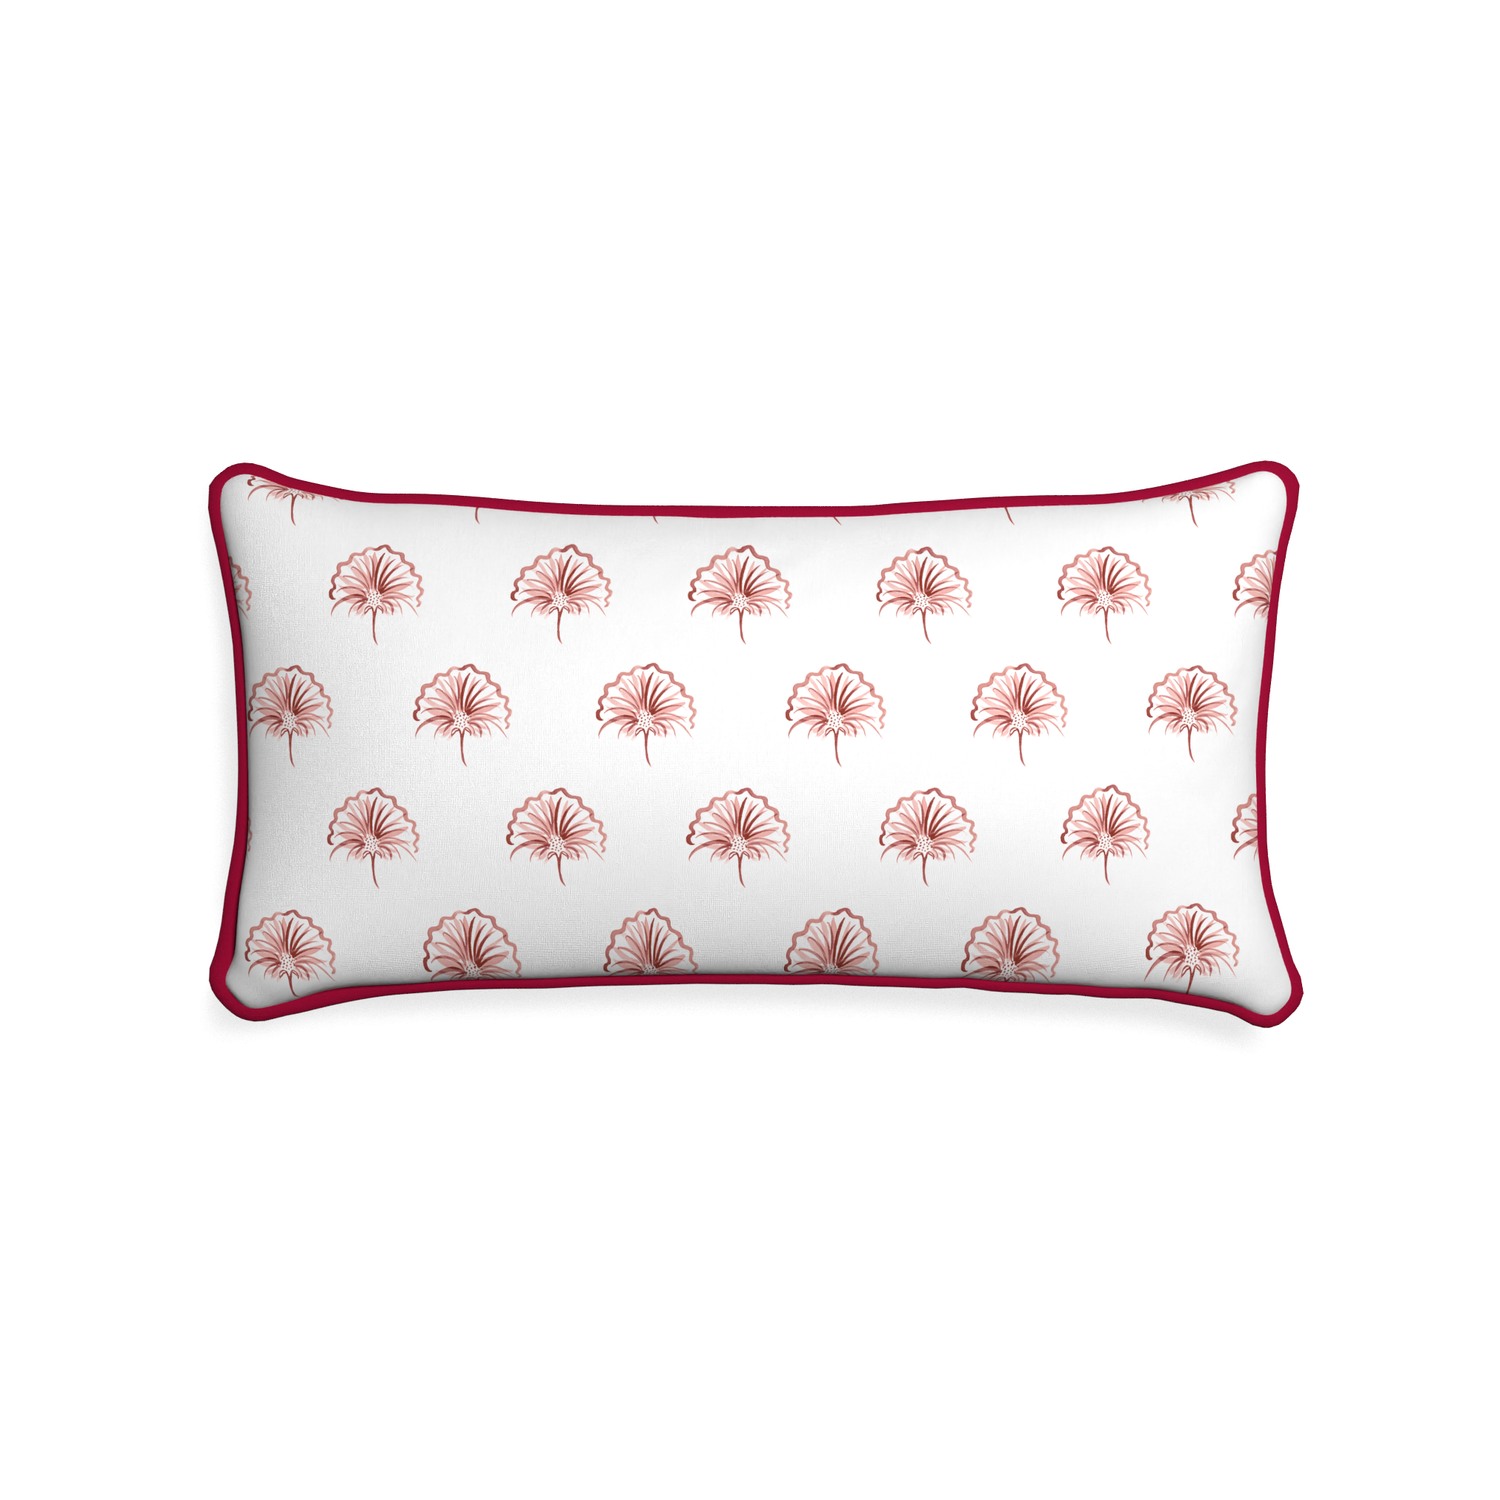 Midi-lumbar penelope rose custom floral pinkpillow with raspberry piping on white background